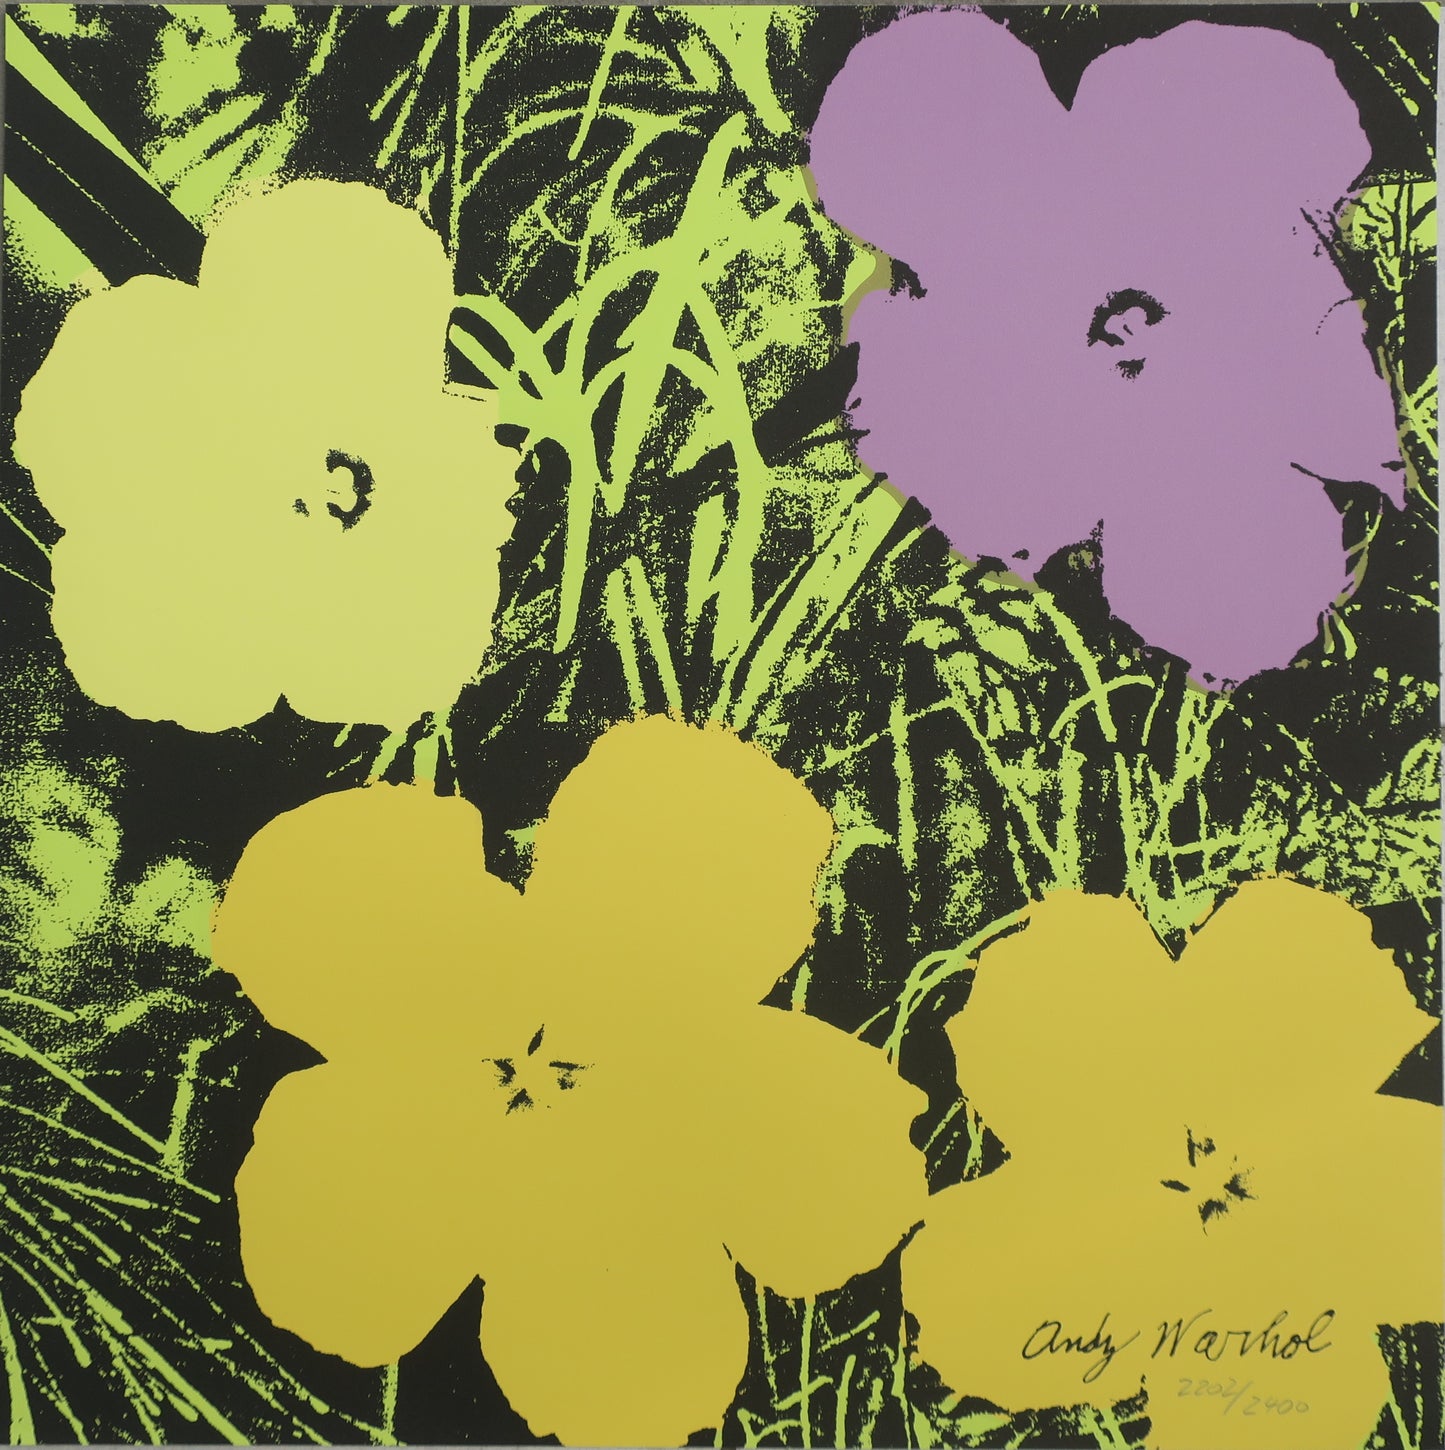 Andy Warhol Flowers Lithograph 